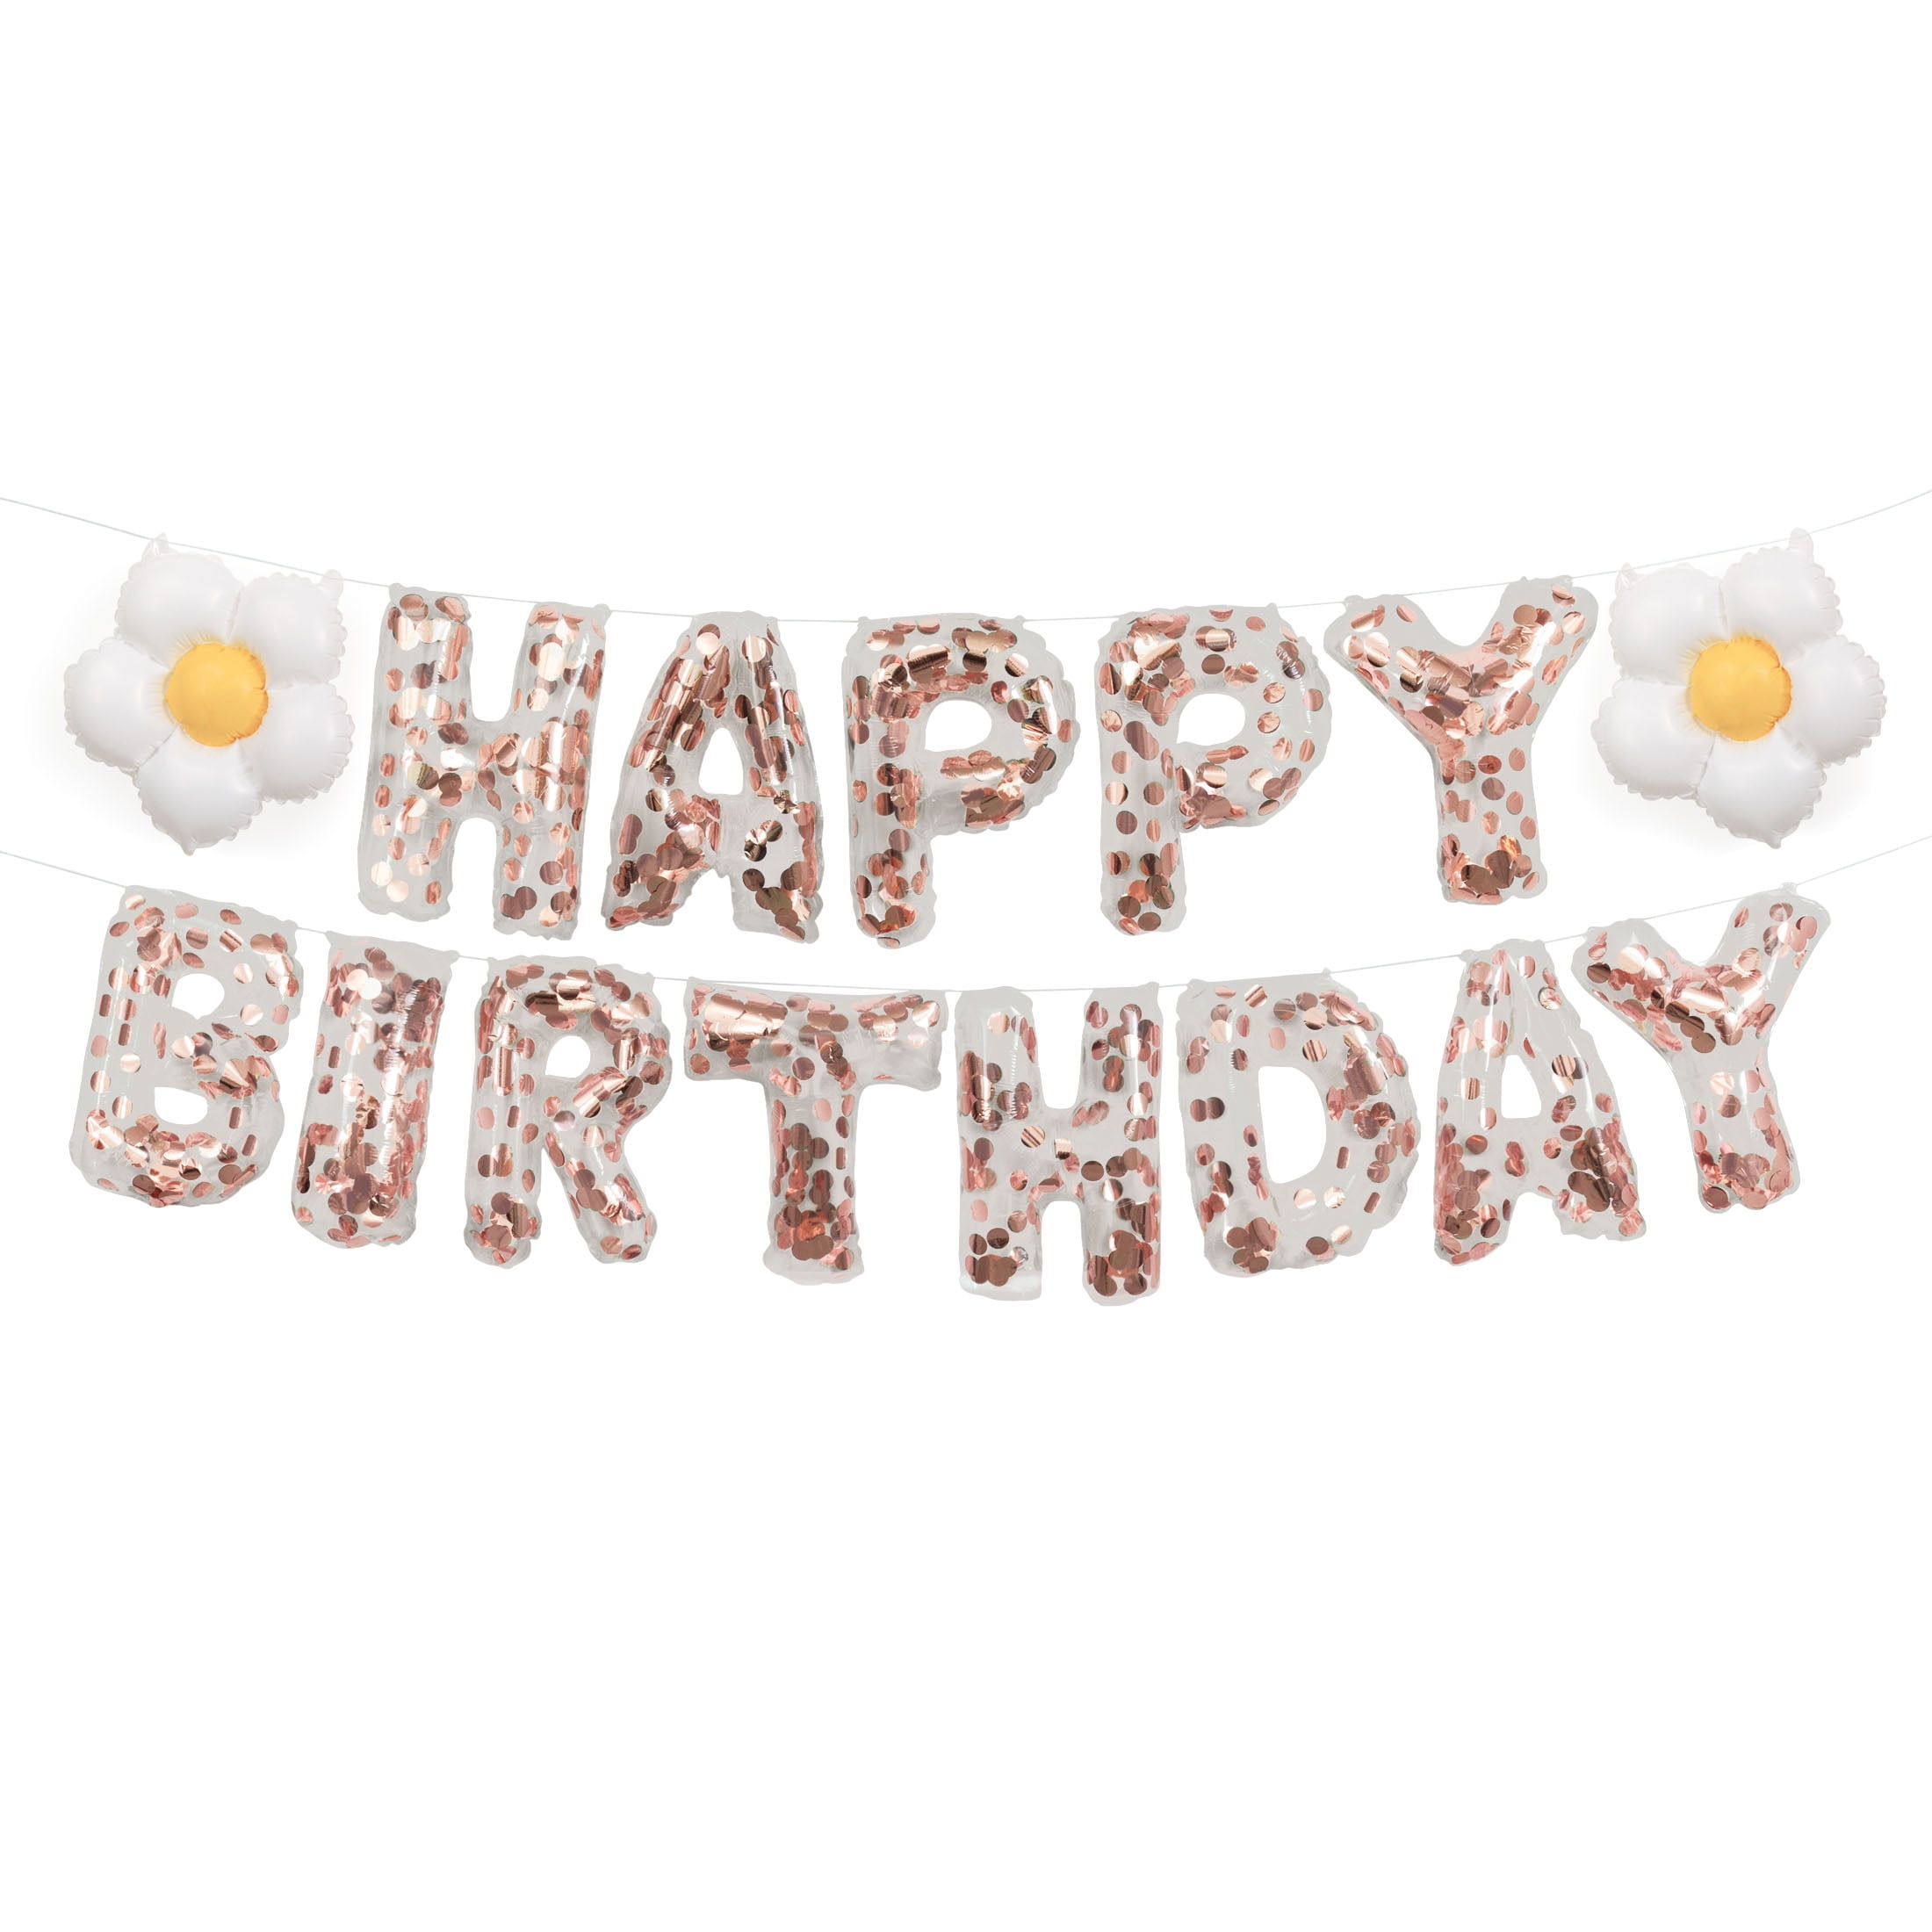 Gold Happy Birthday Balloon Letters With 14 Balloons, Birthday Ballon Kit  Includes 13 Mylar Balloons 